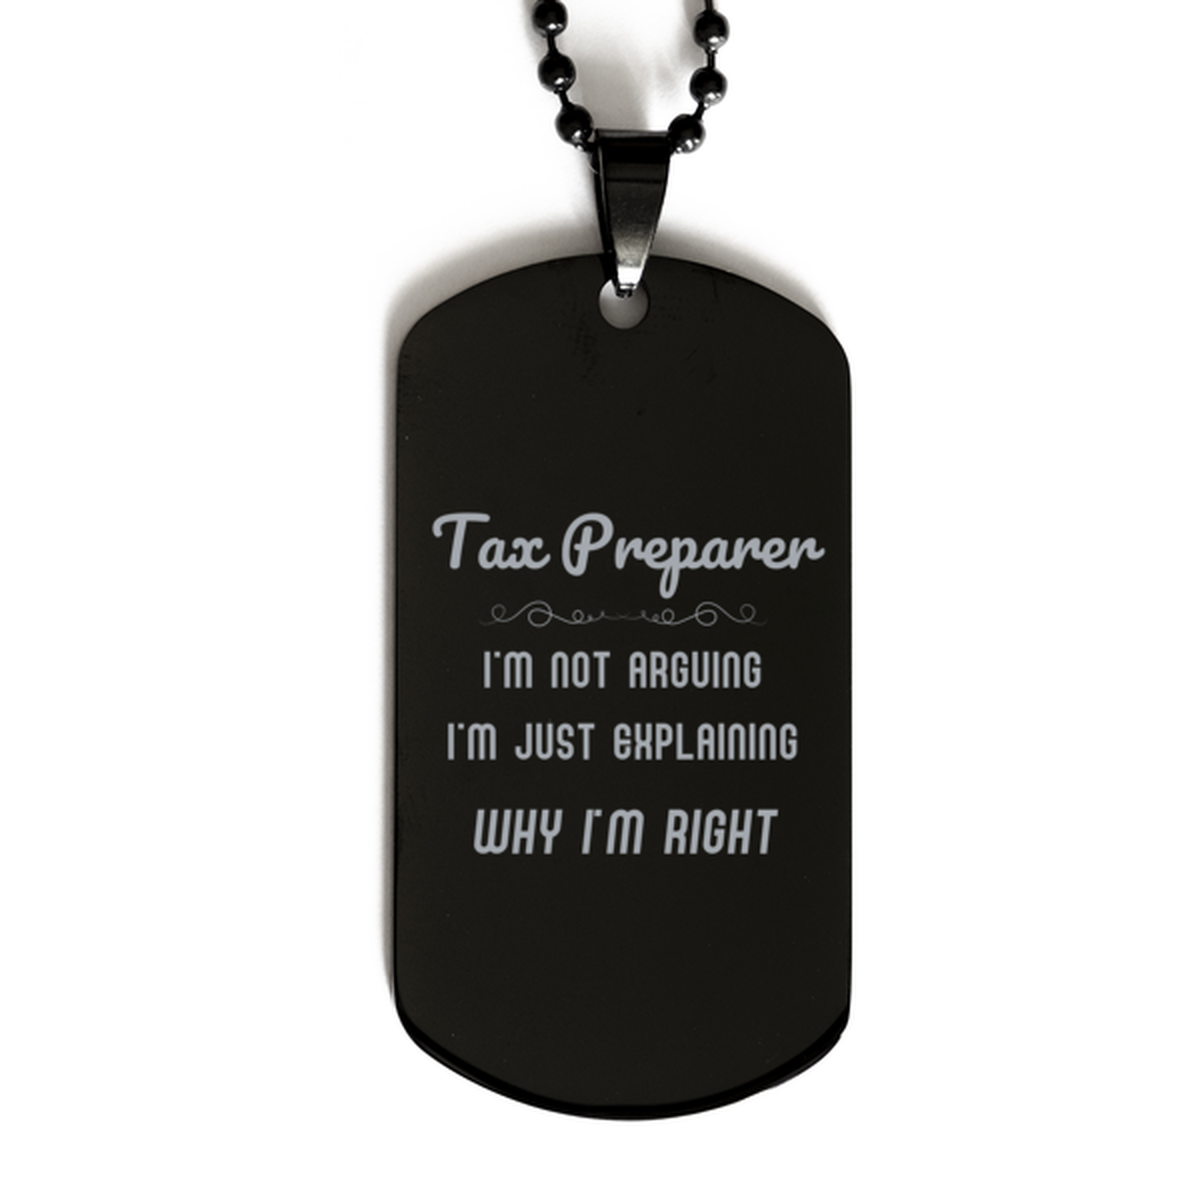 Tax Preparer I'm not Arguing. I'm Just Explaining Why I'm RIGHT Black Dog Tag, Funny Saying Quote Tax Preparer Gifts For Tax Preparer Graduation Birthday Christmas Gifts for Men Women Coworker